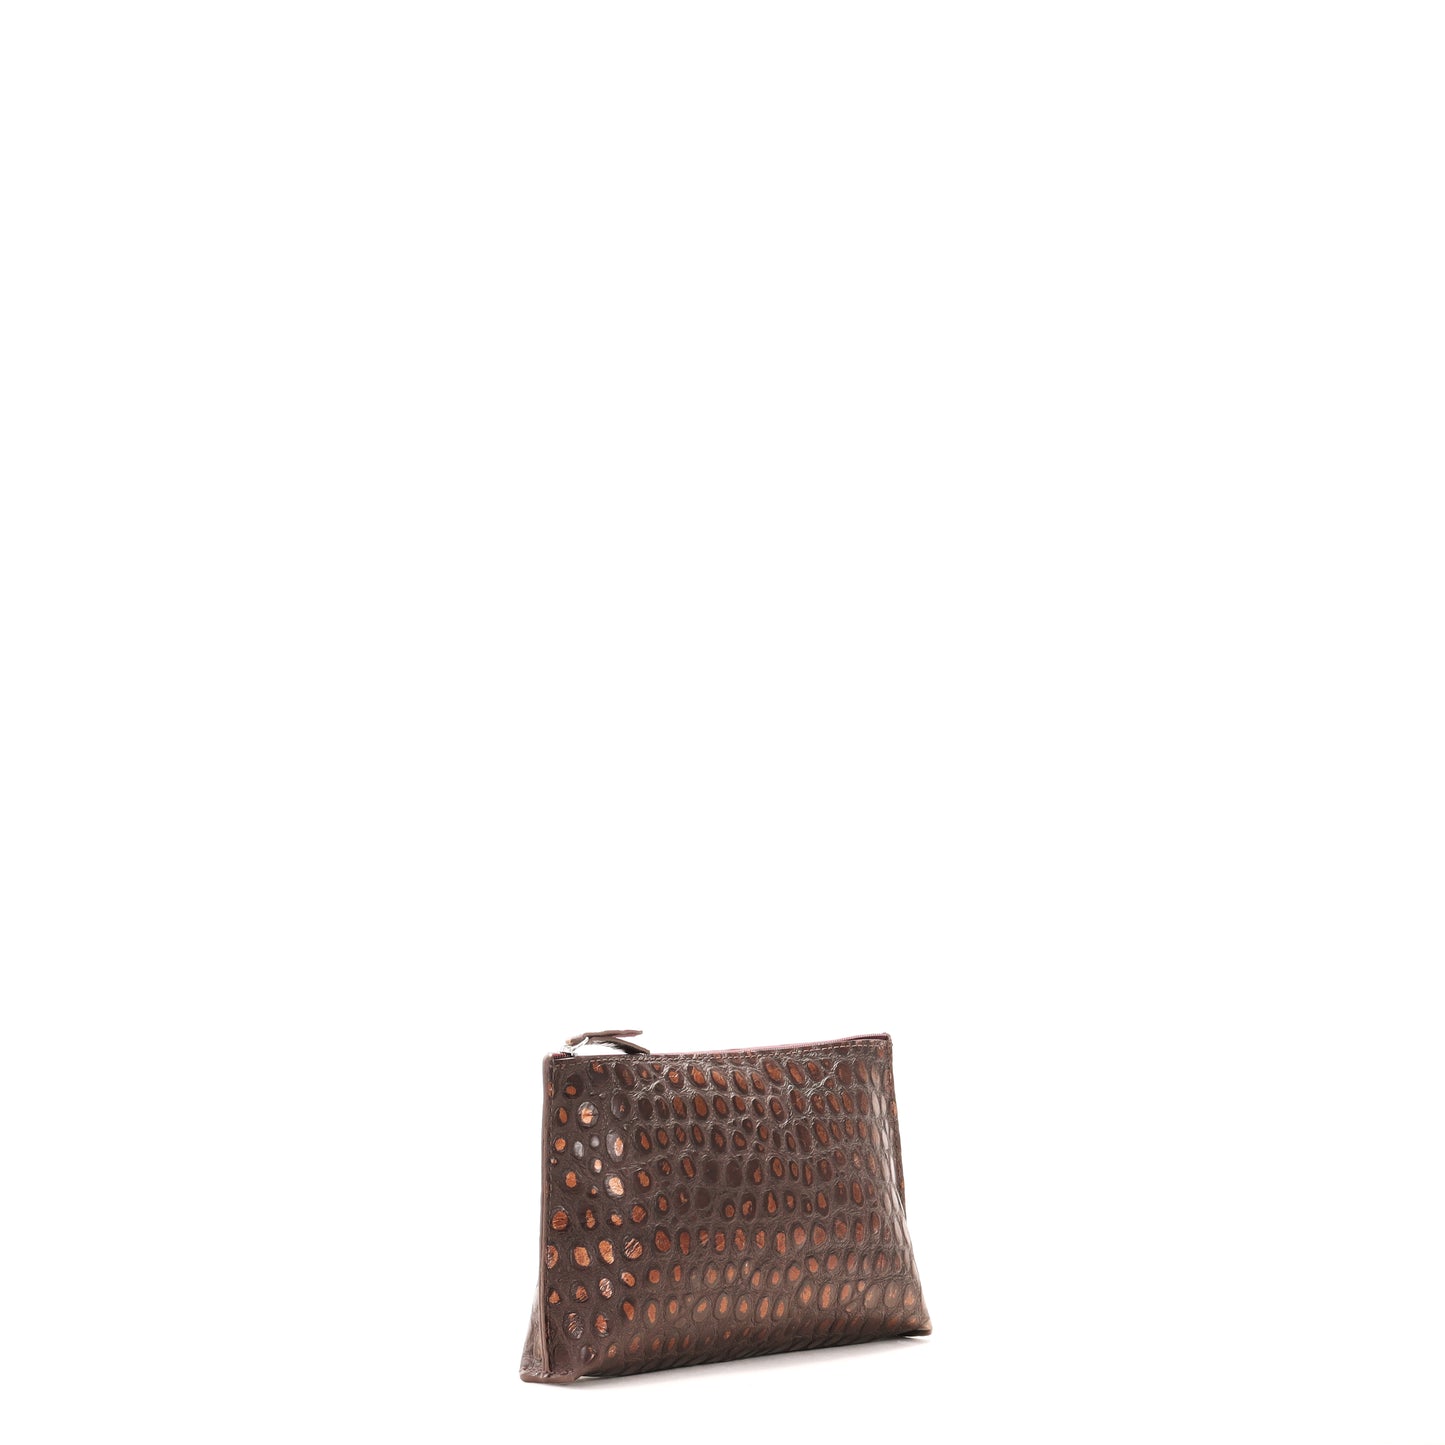 ESSENTIAL POUCH COPPER PENNY